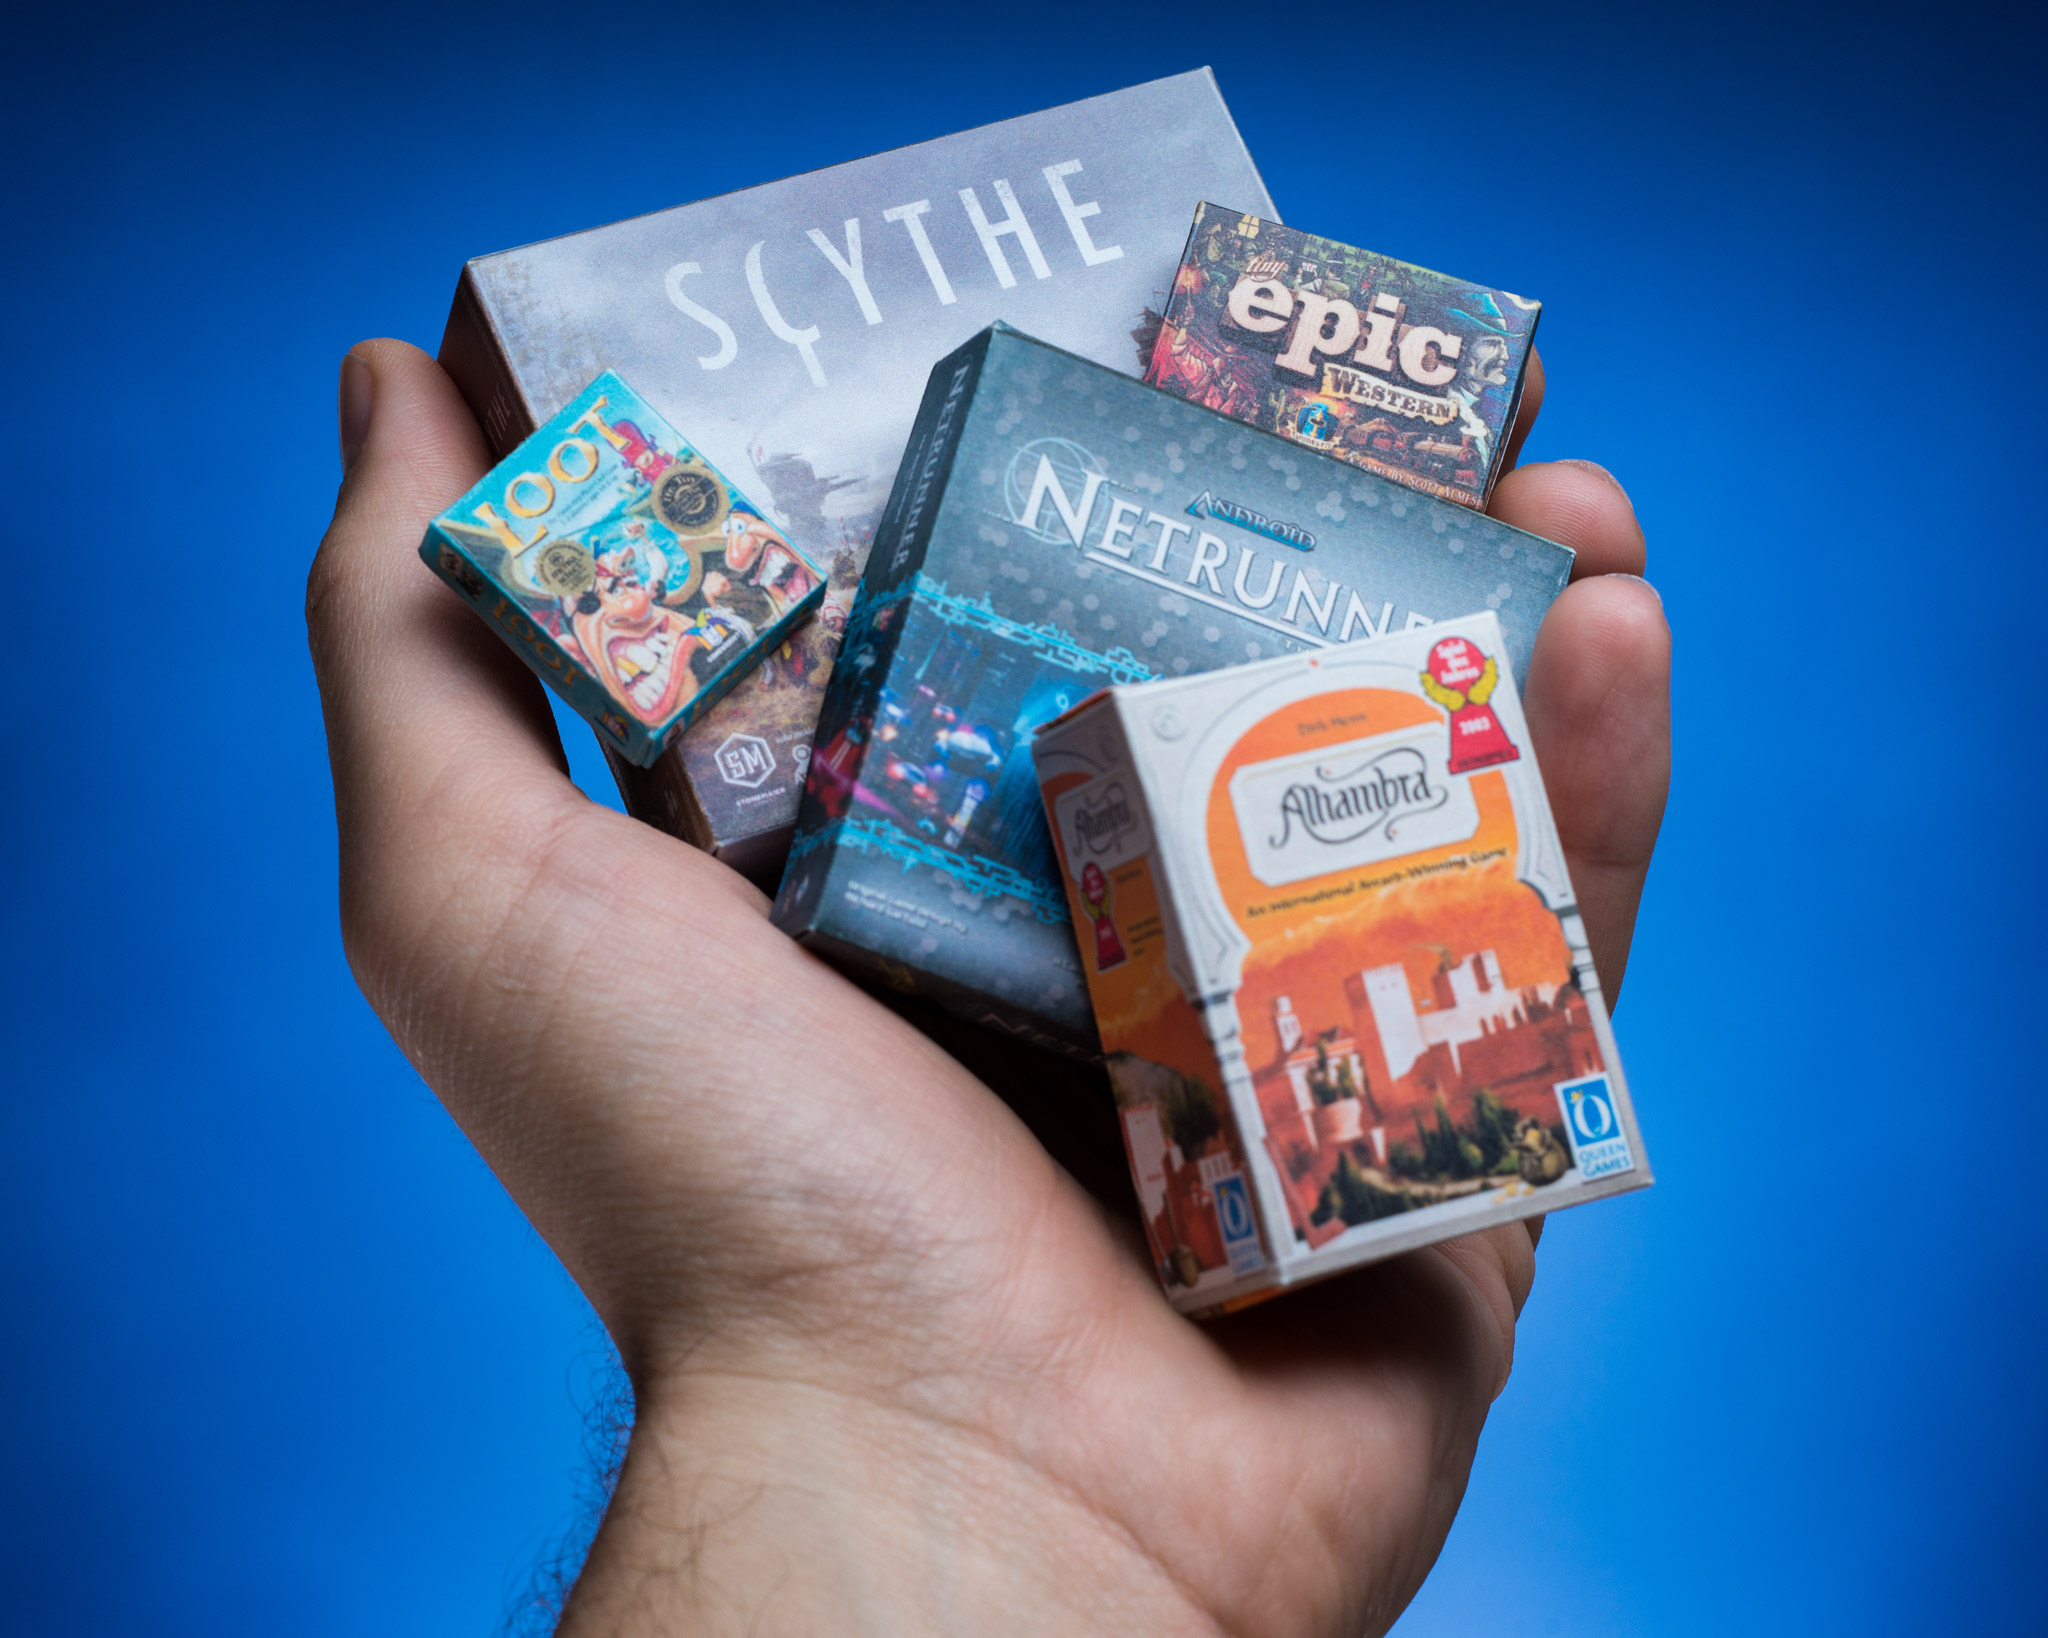 Tiny board game boxes – Scythe, Alhambra, Android Netrunner, Loot, Tiny Epic Western